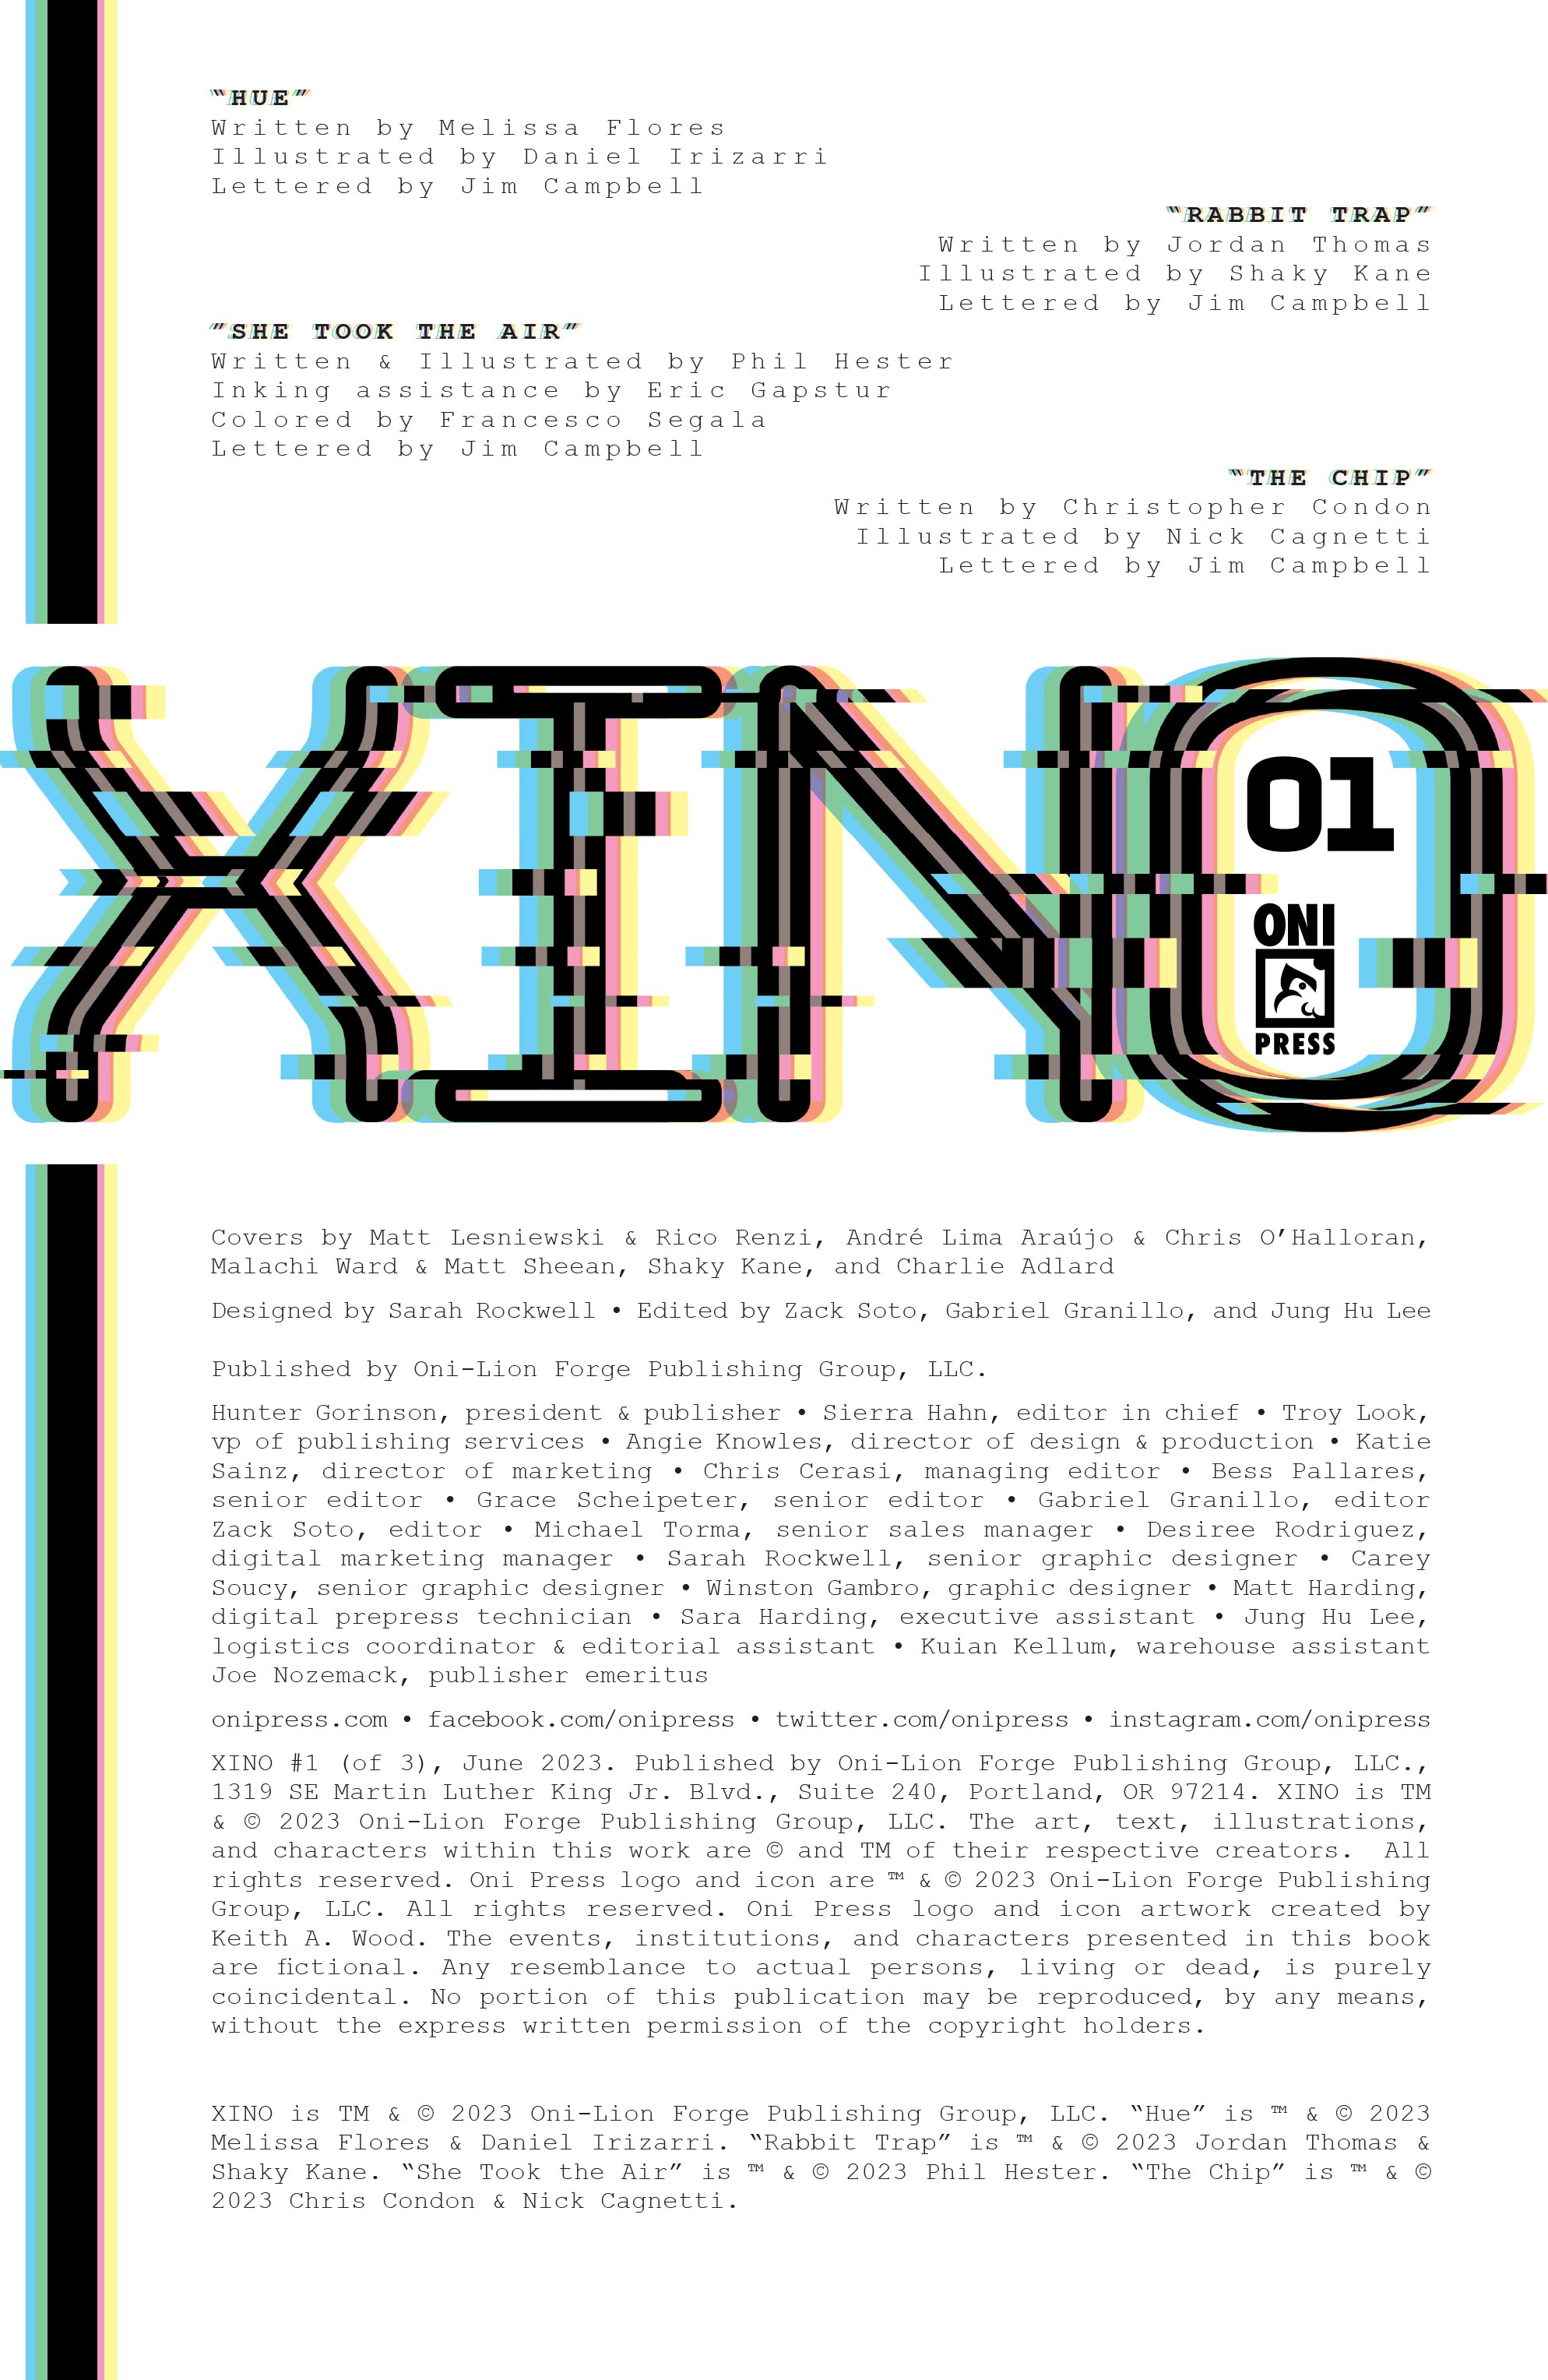 Read online Xino comic -  Issue #1 - 2